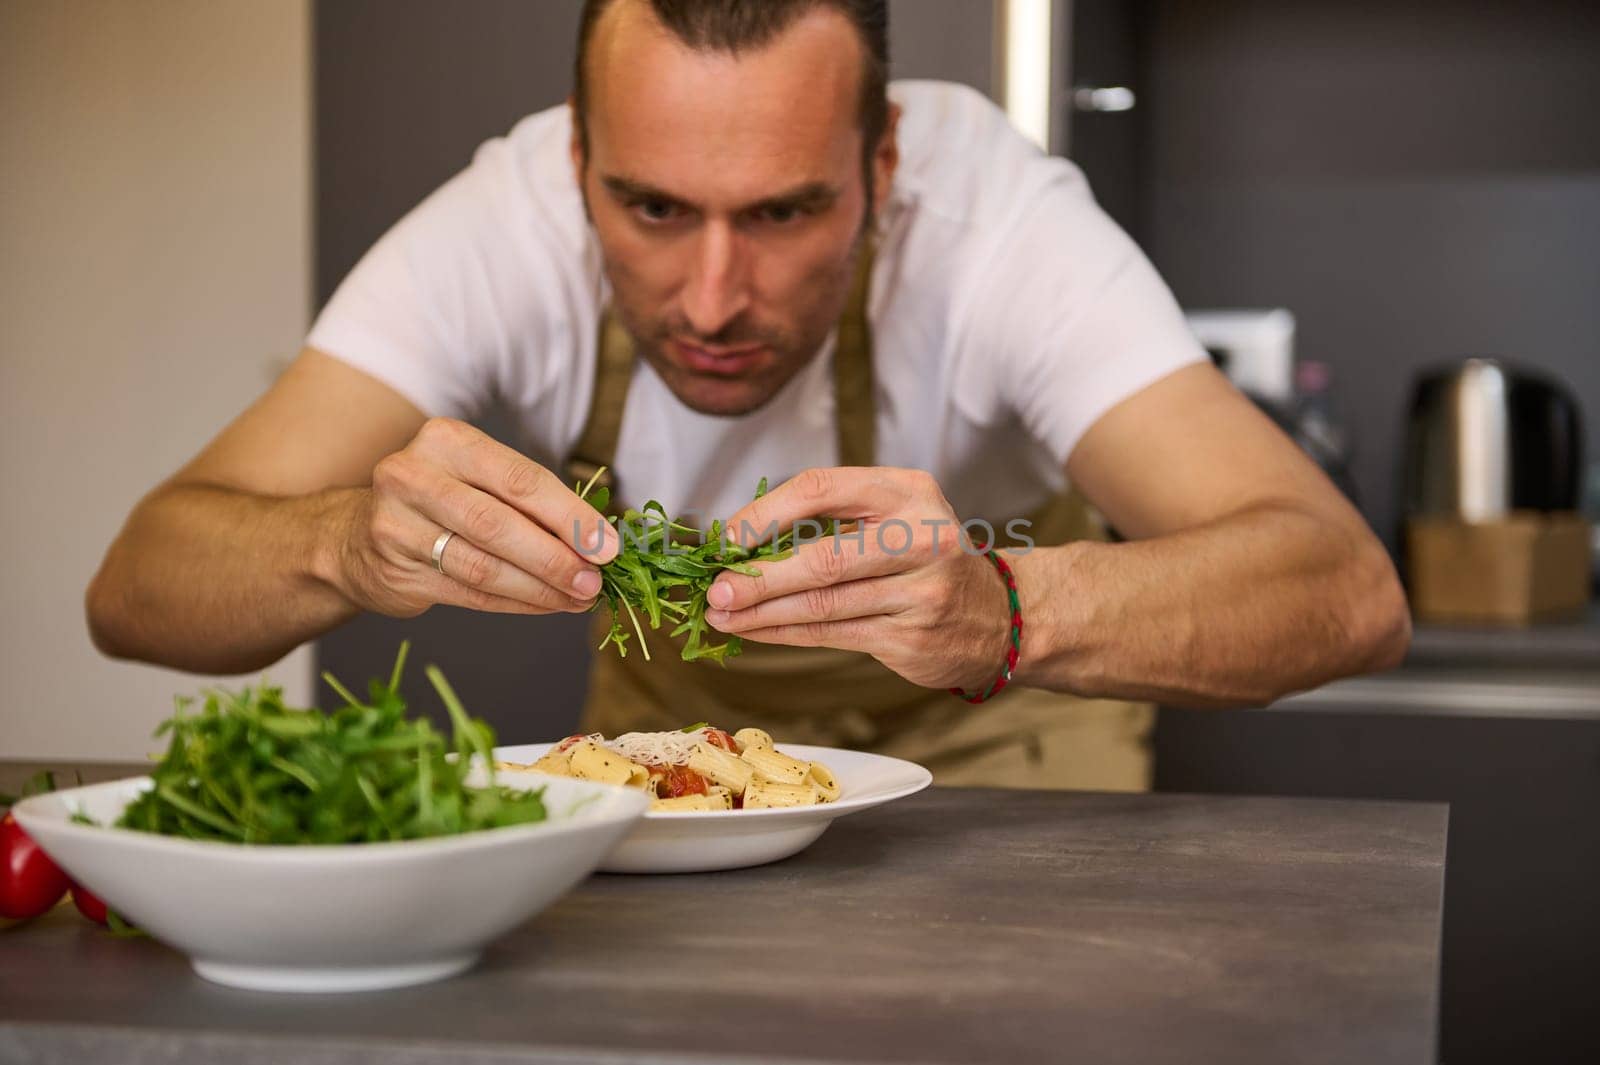 Male chef adding fresh green arugula leaves to Italian pasta with tomato sauce, garnishing the dish. A man preparing dinner in home kitchen. Selective focus on hands holding greens for seasoning food